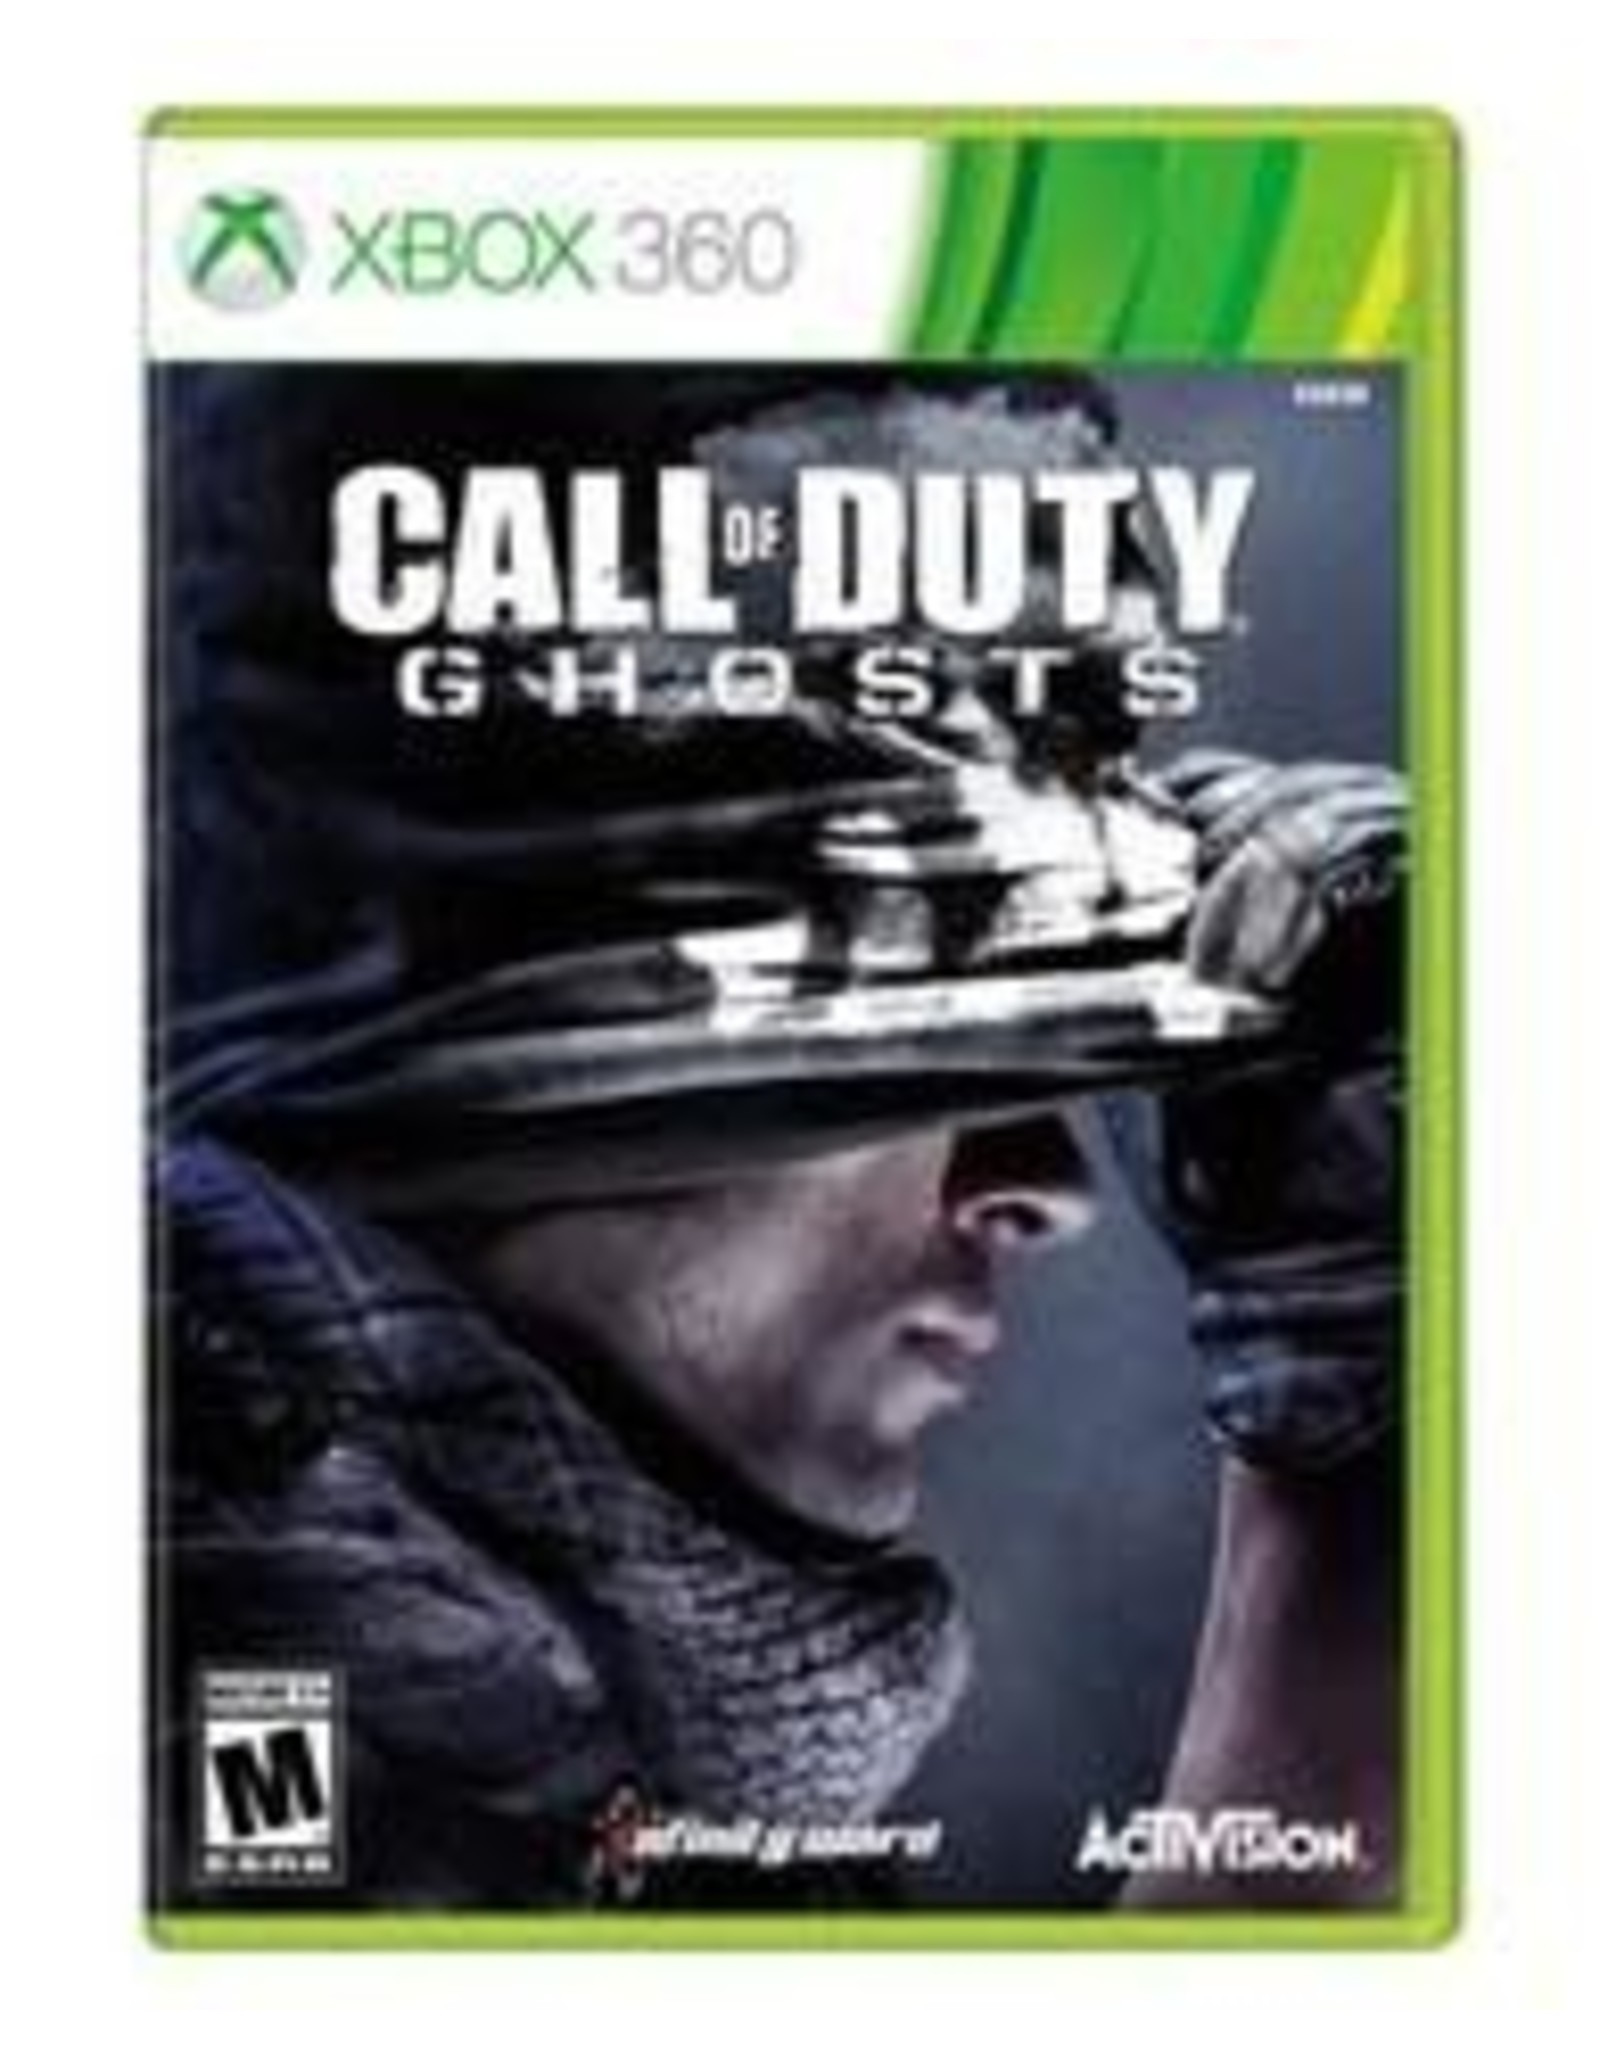 Xbox 360 Call of Duty Ghosts (Used)